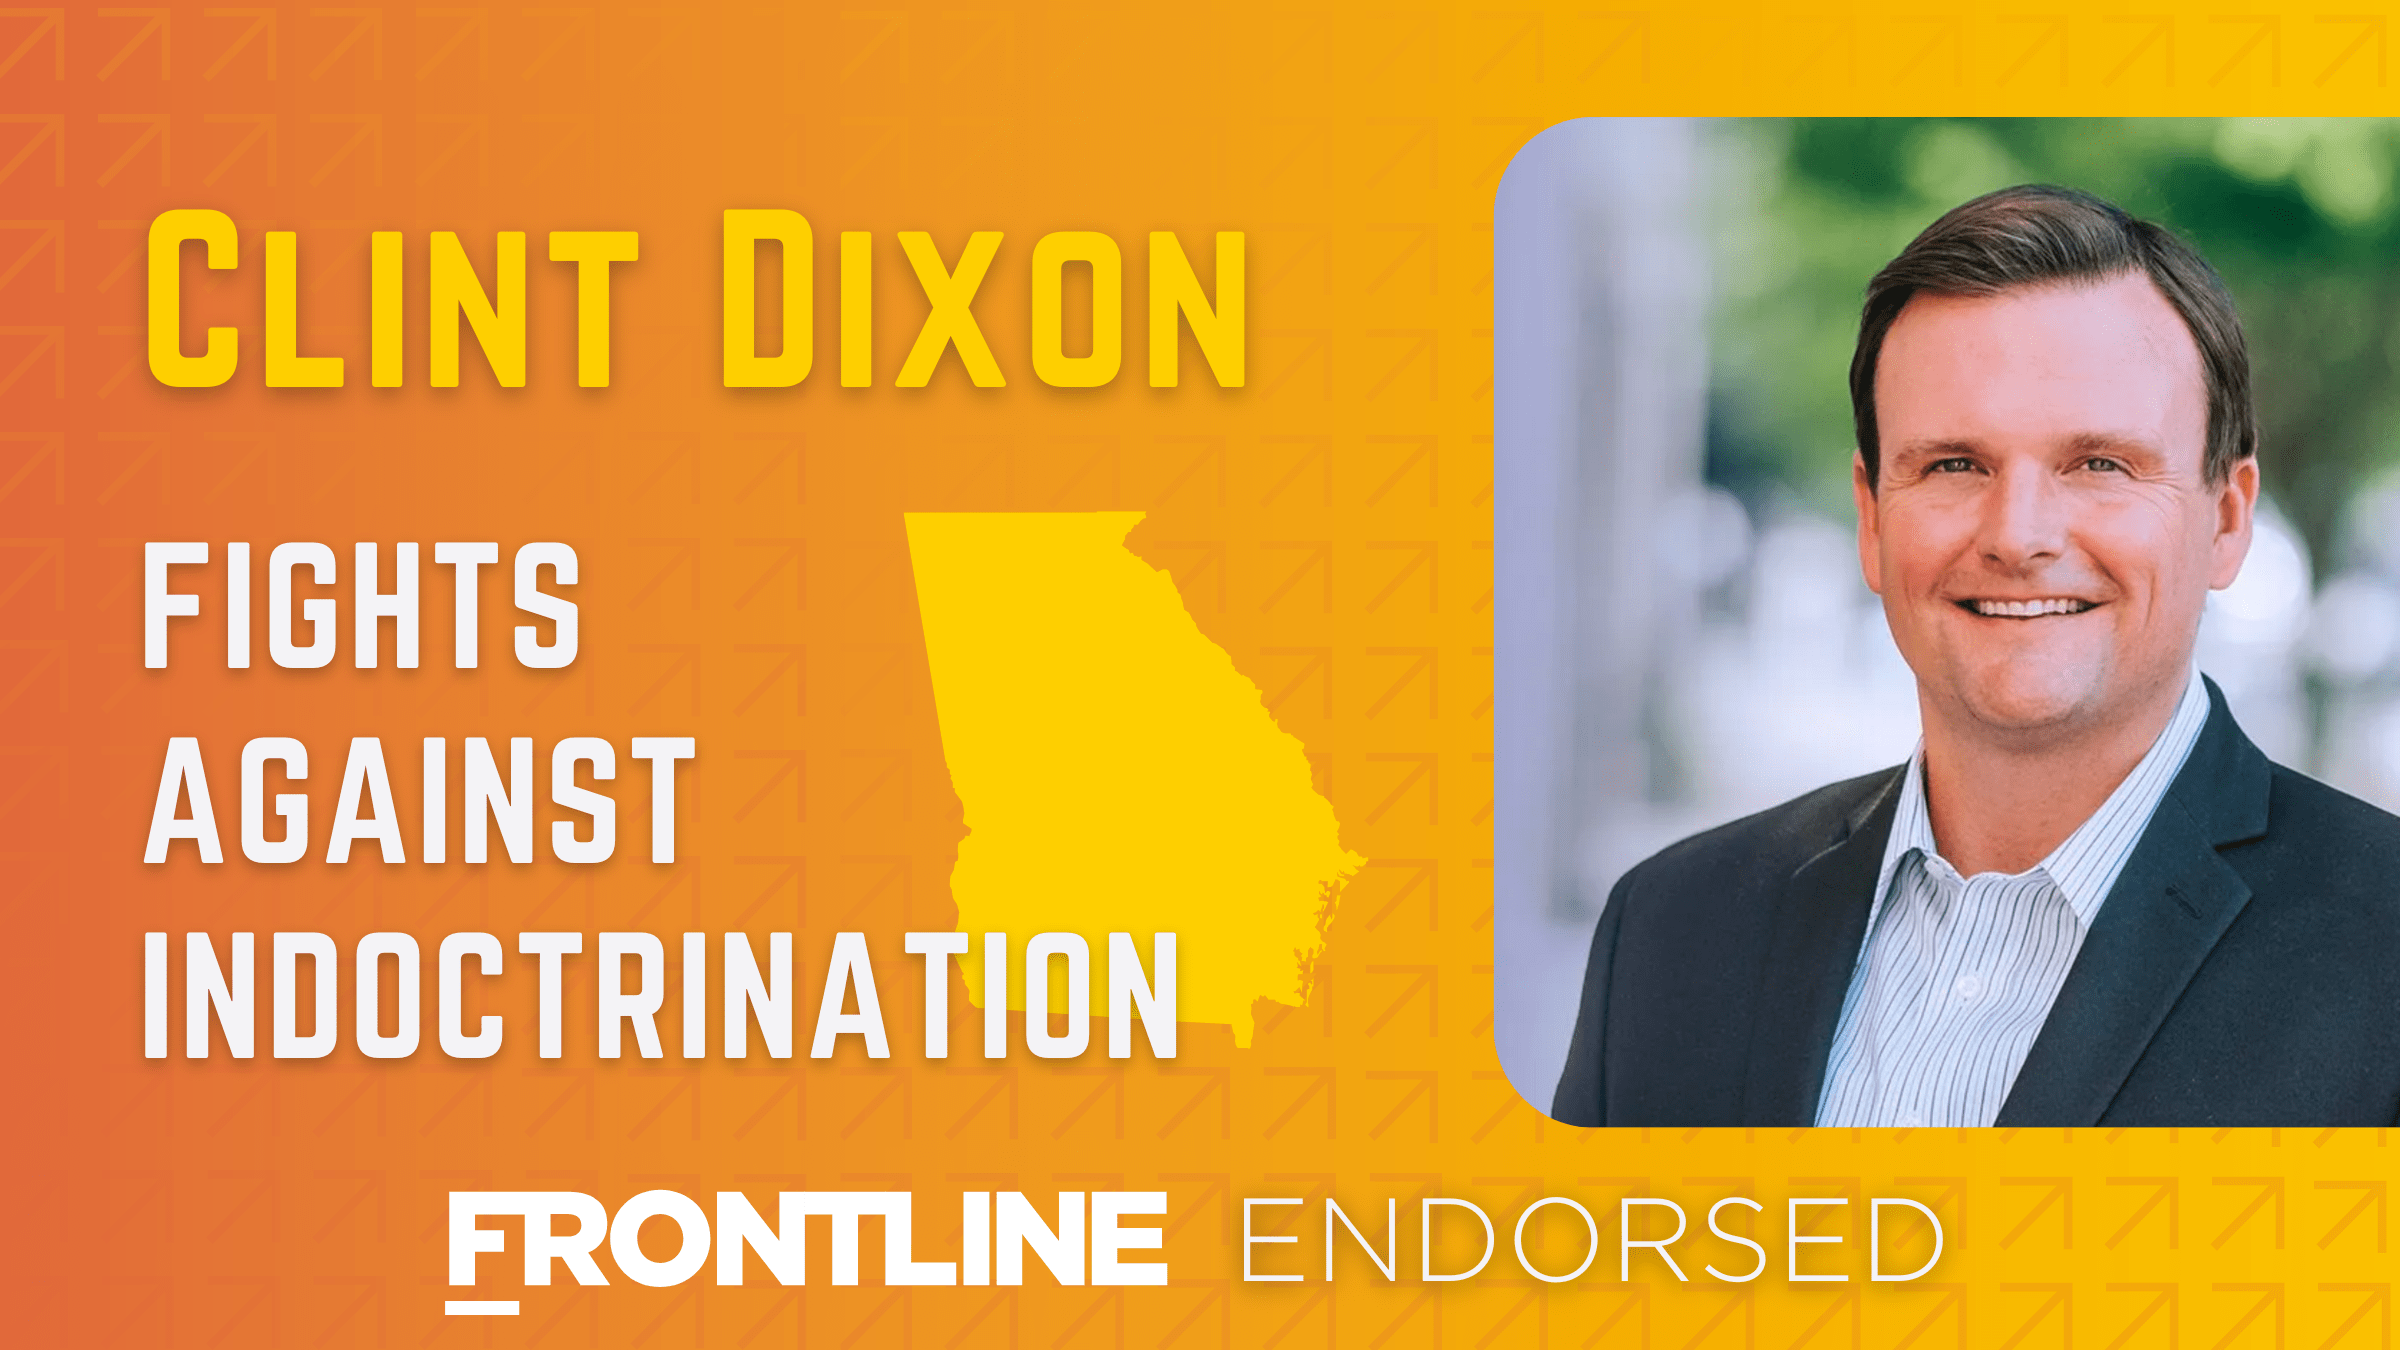 Reminder – Vote for Clint Dixon for State Senate District 45